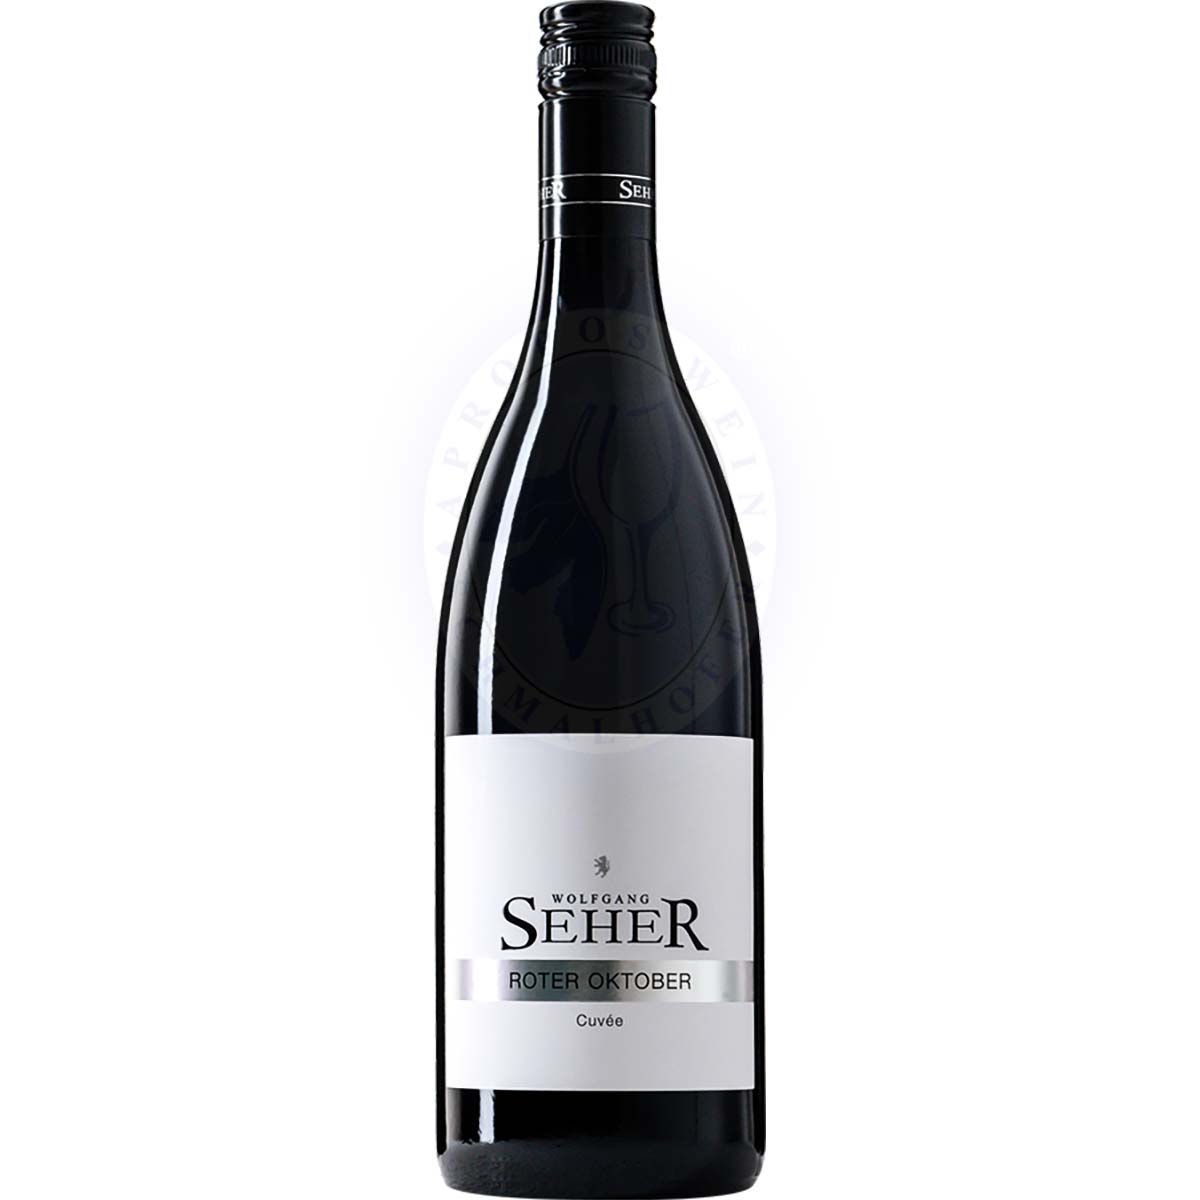 Roter Oktober Cuvee Rot 2018 Seher 0,75l